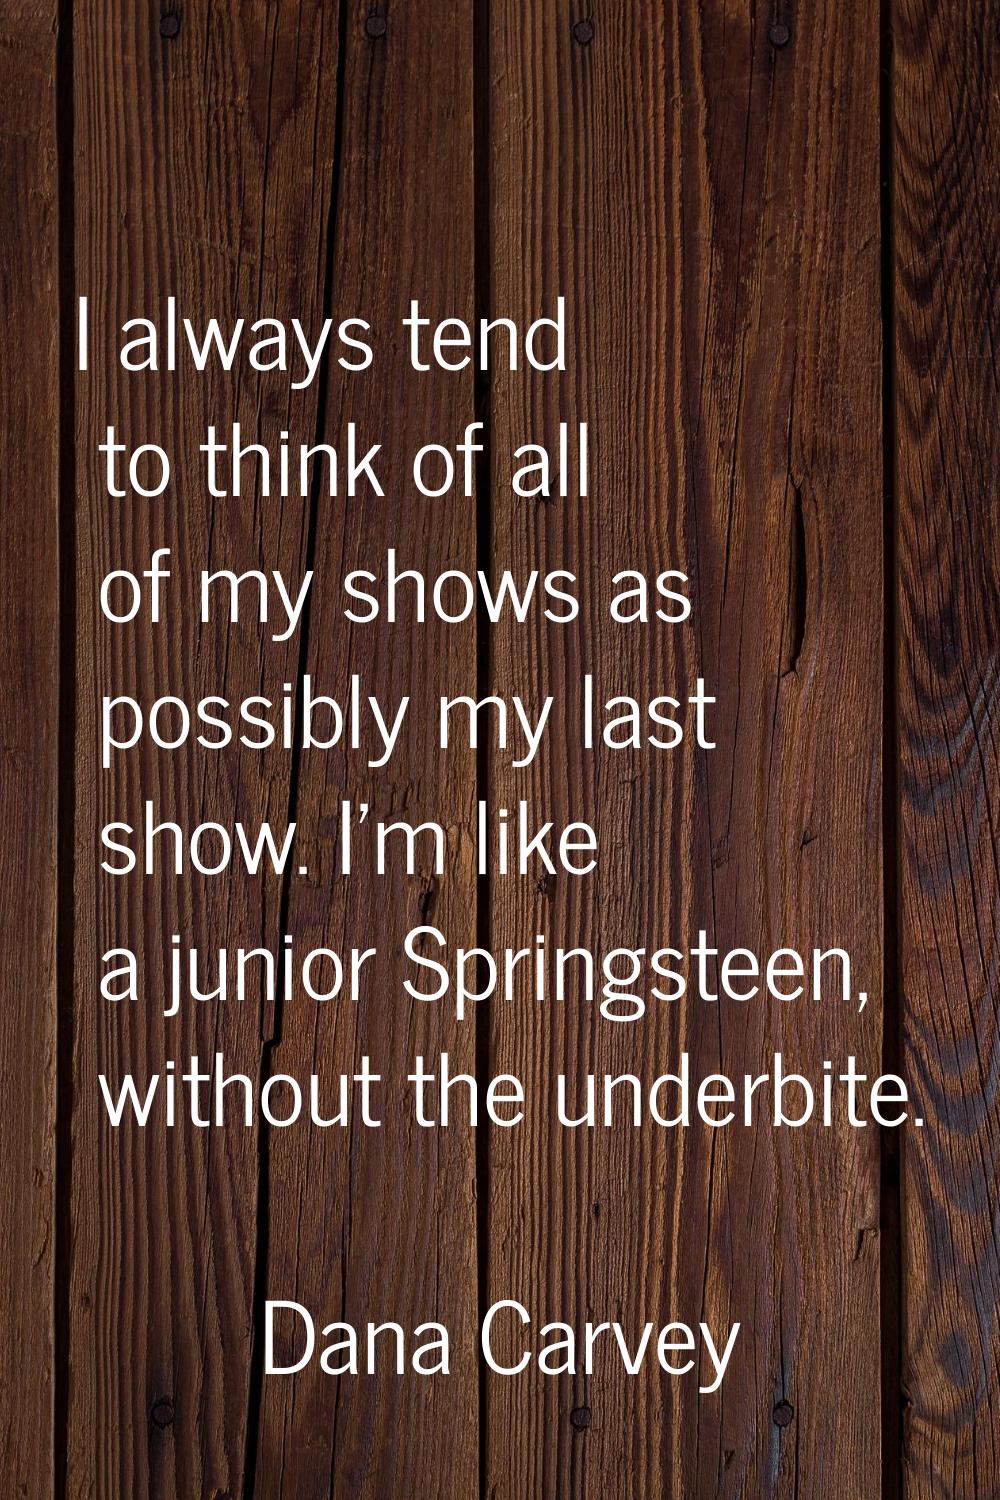 I always tend to think of all of my shows as possibly my last show. I'm like a junior Springsteen, 